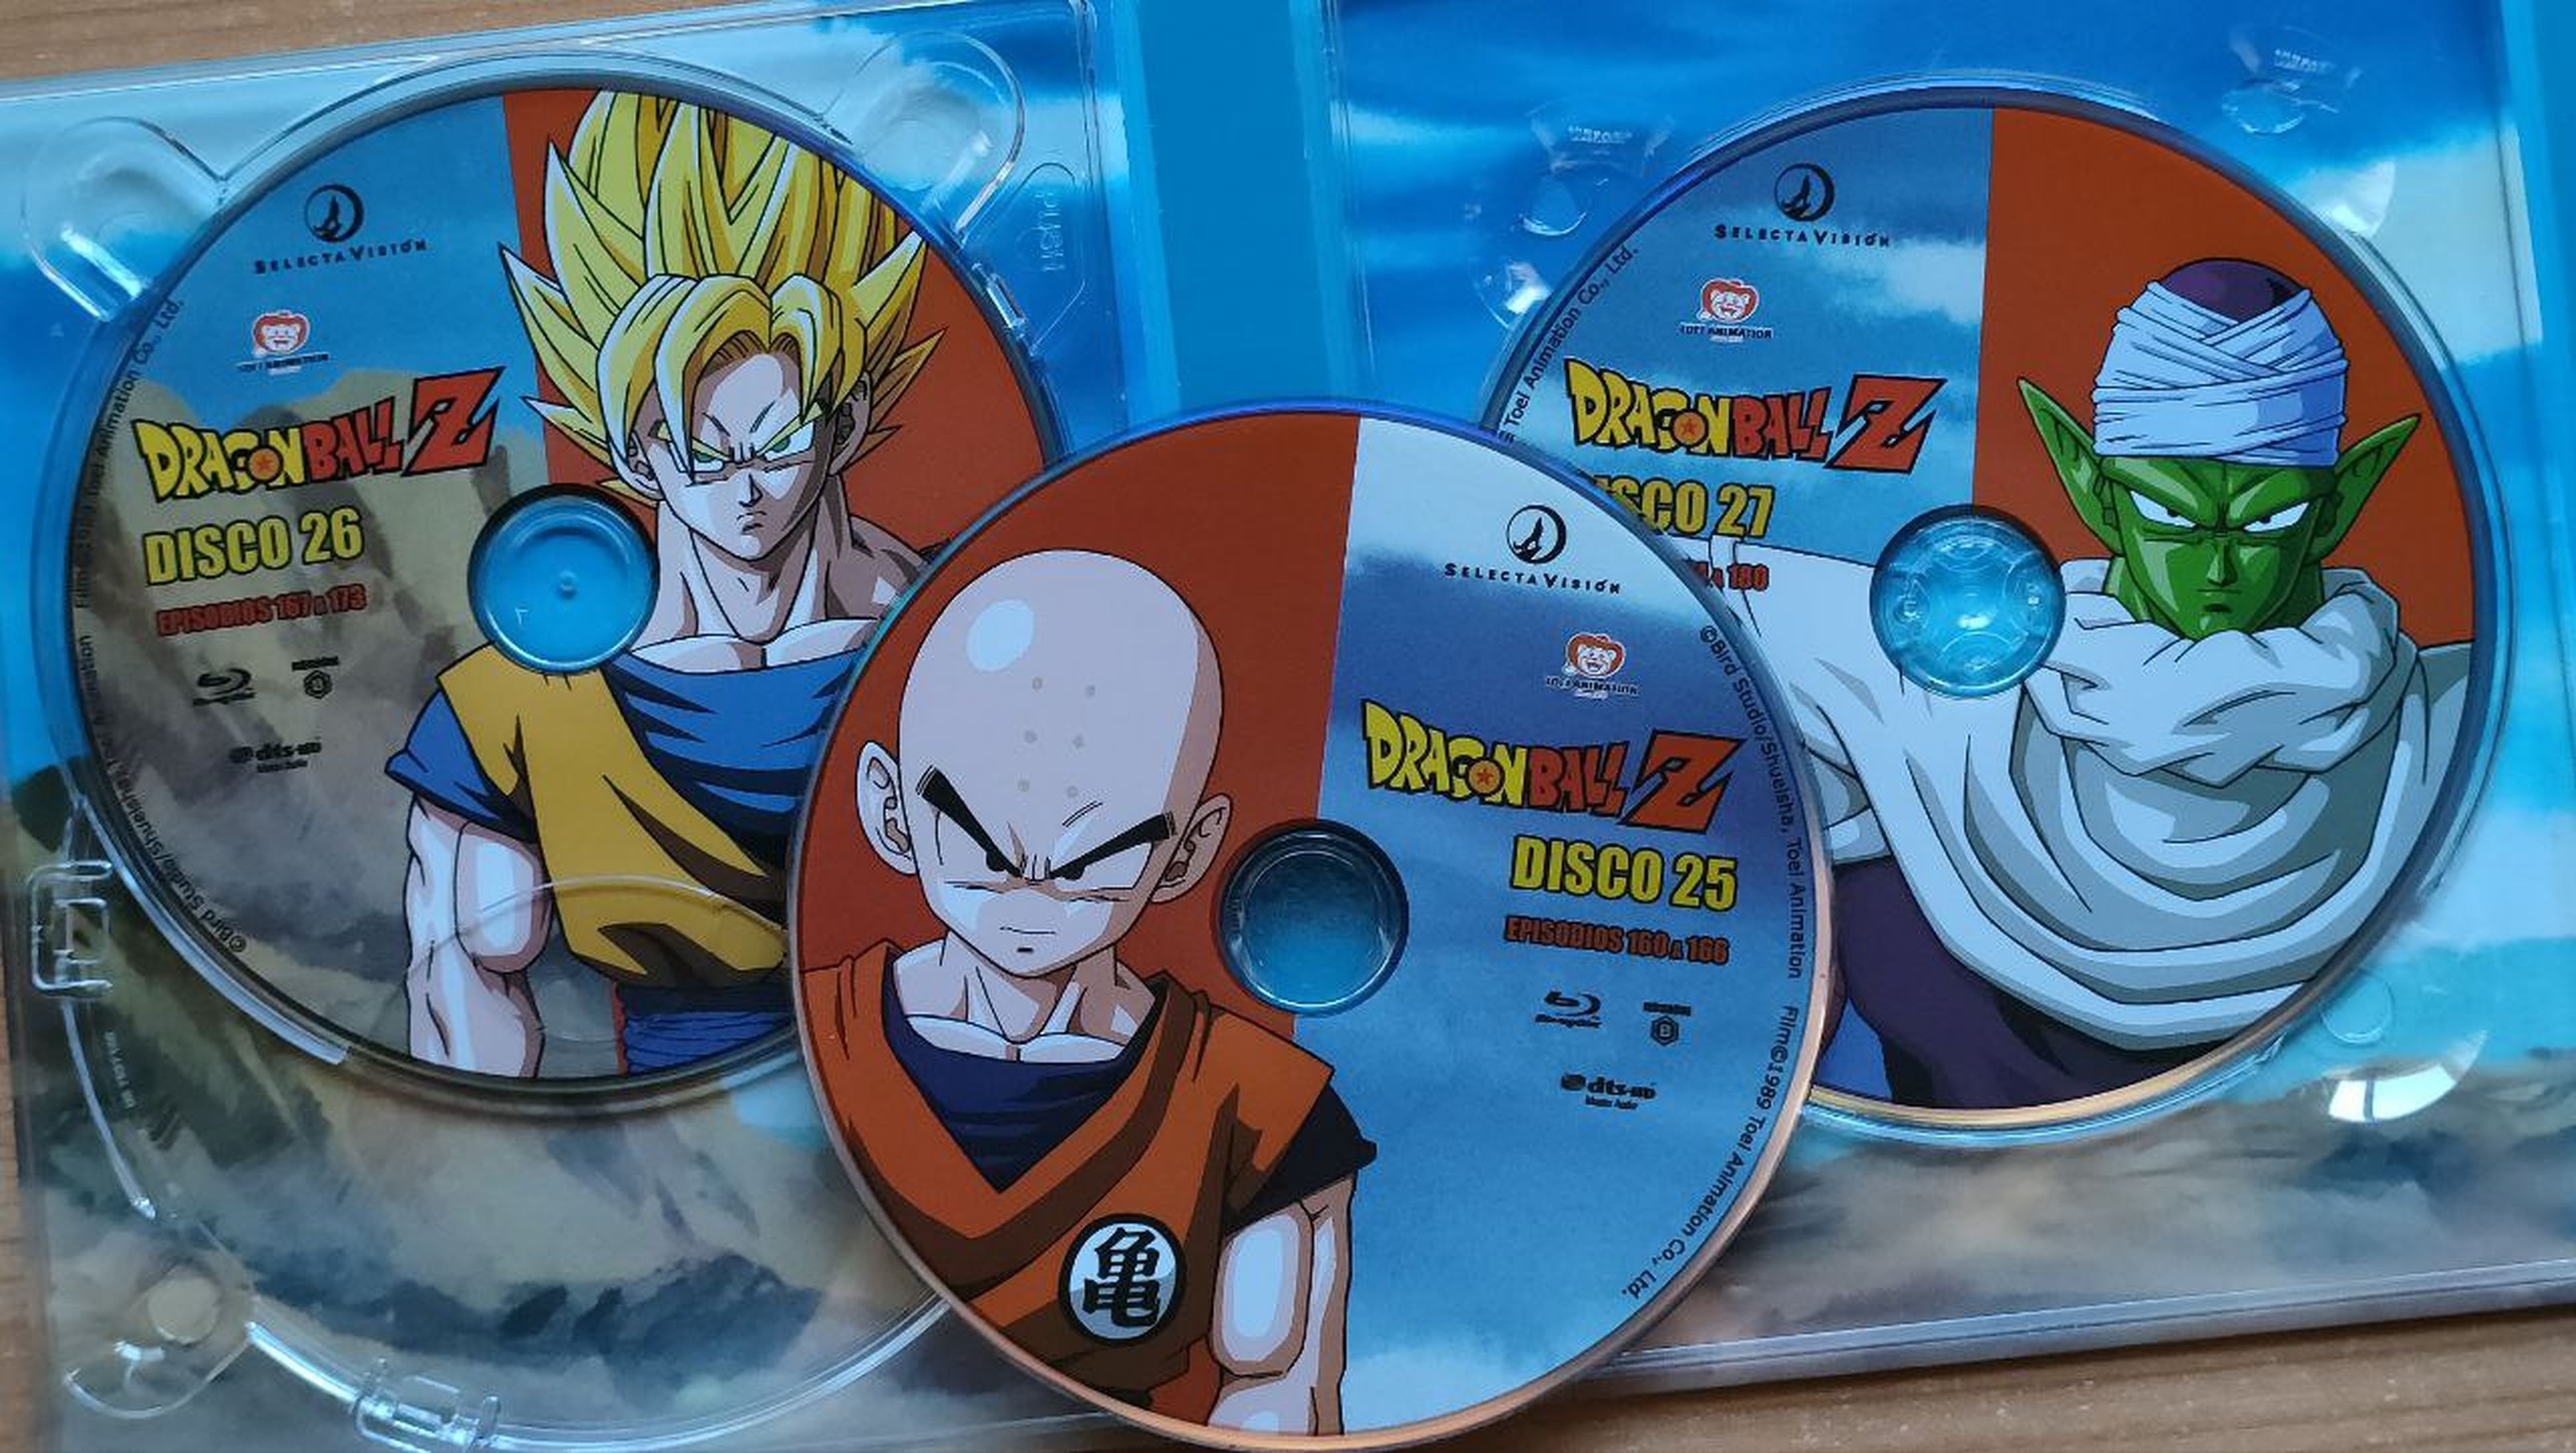 Dragon Ball Z - Photo Report and Box 9 Content on Blu-ray by Selecta Vision 